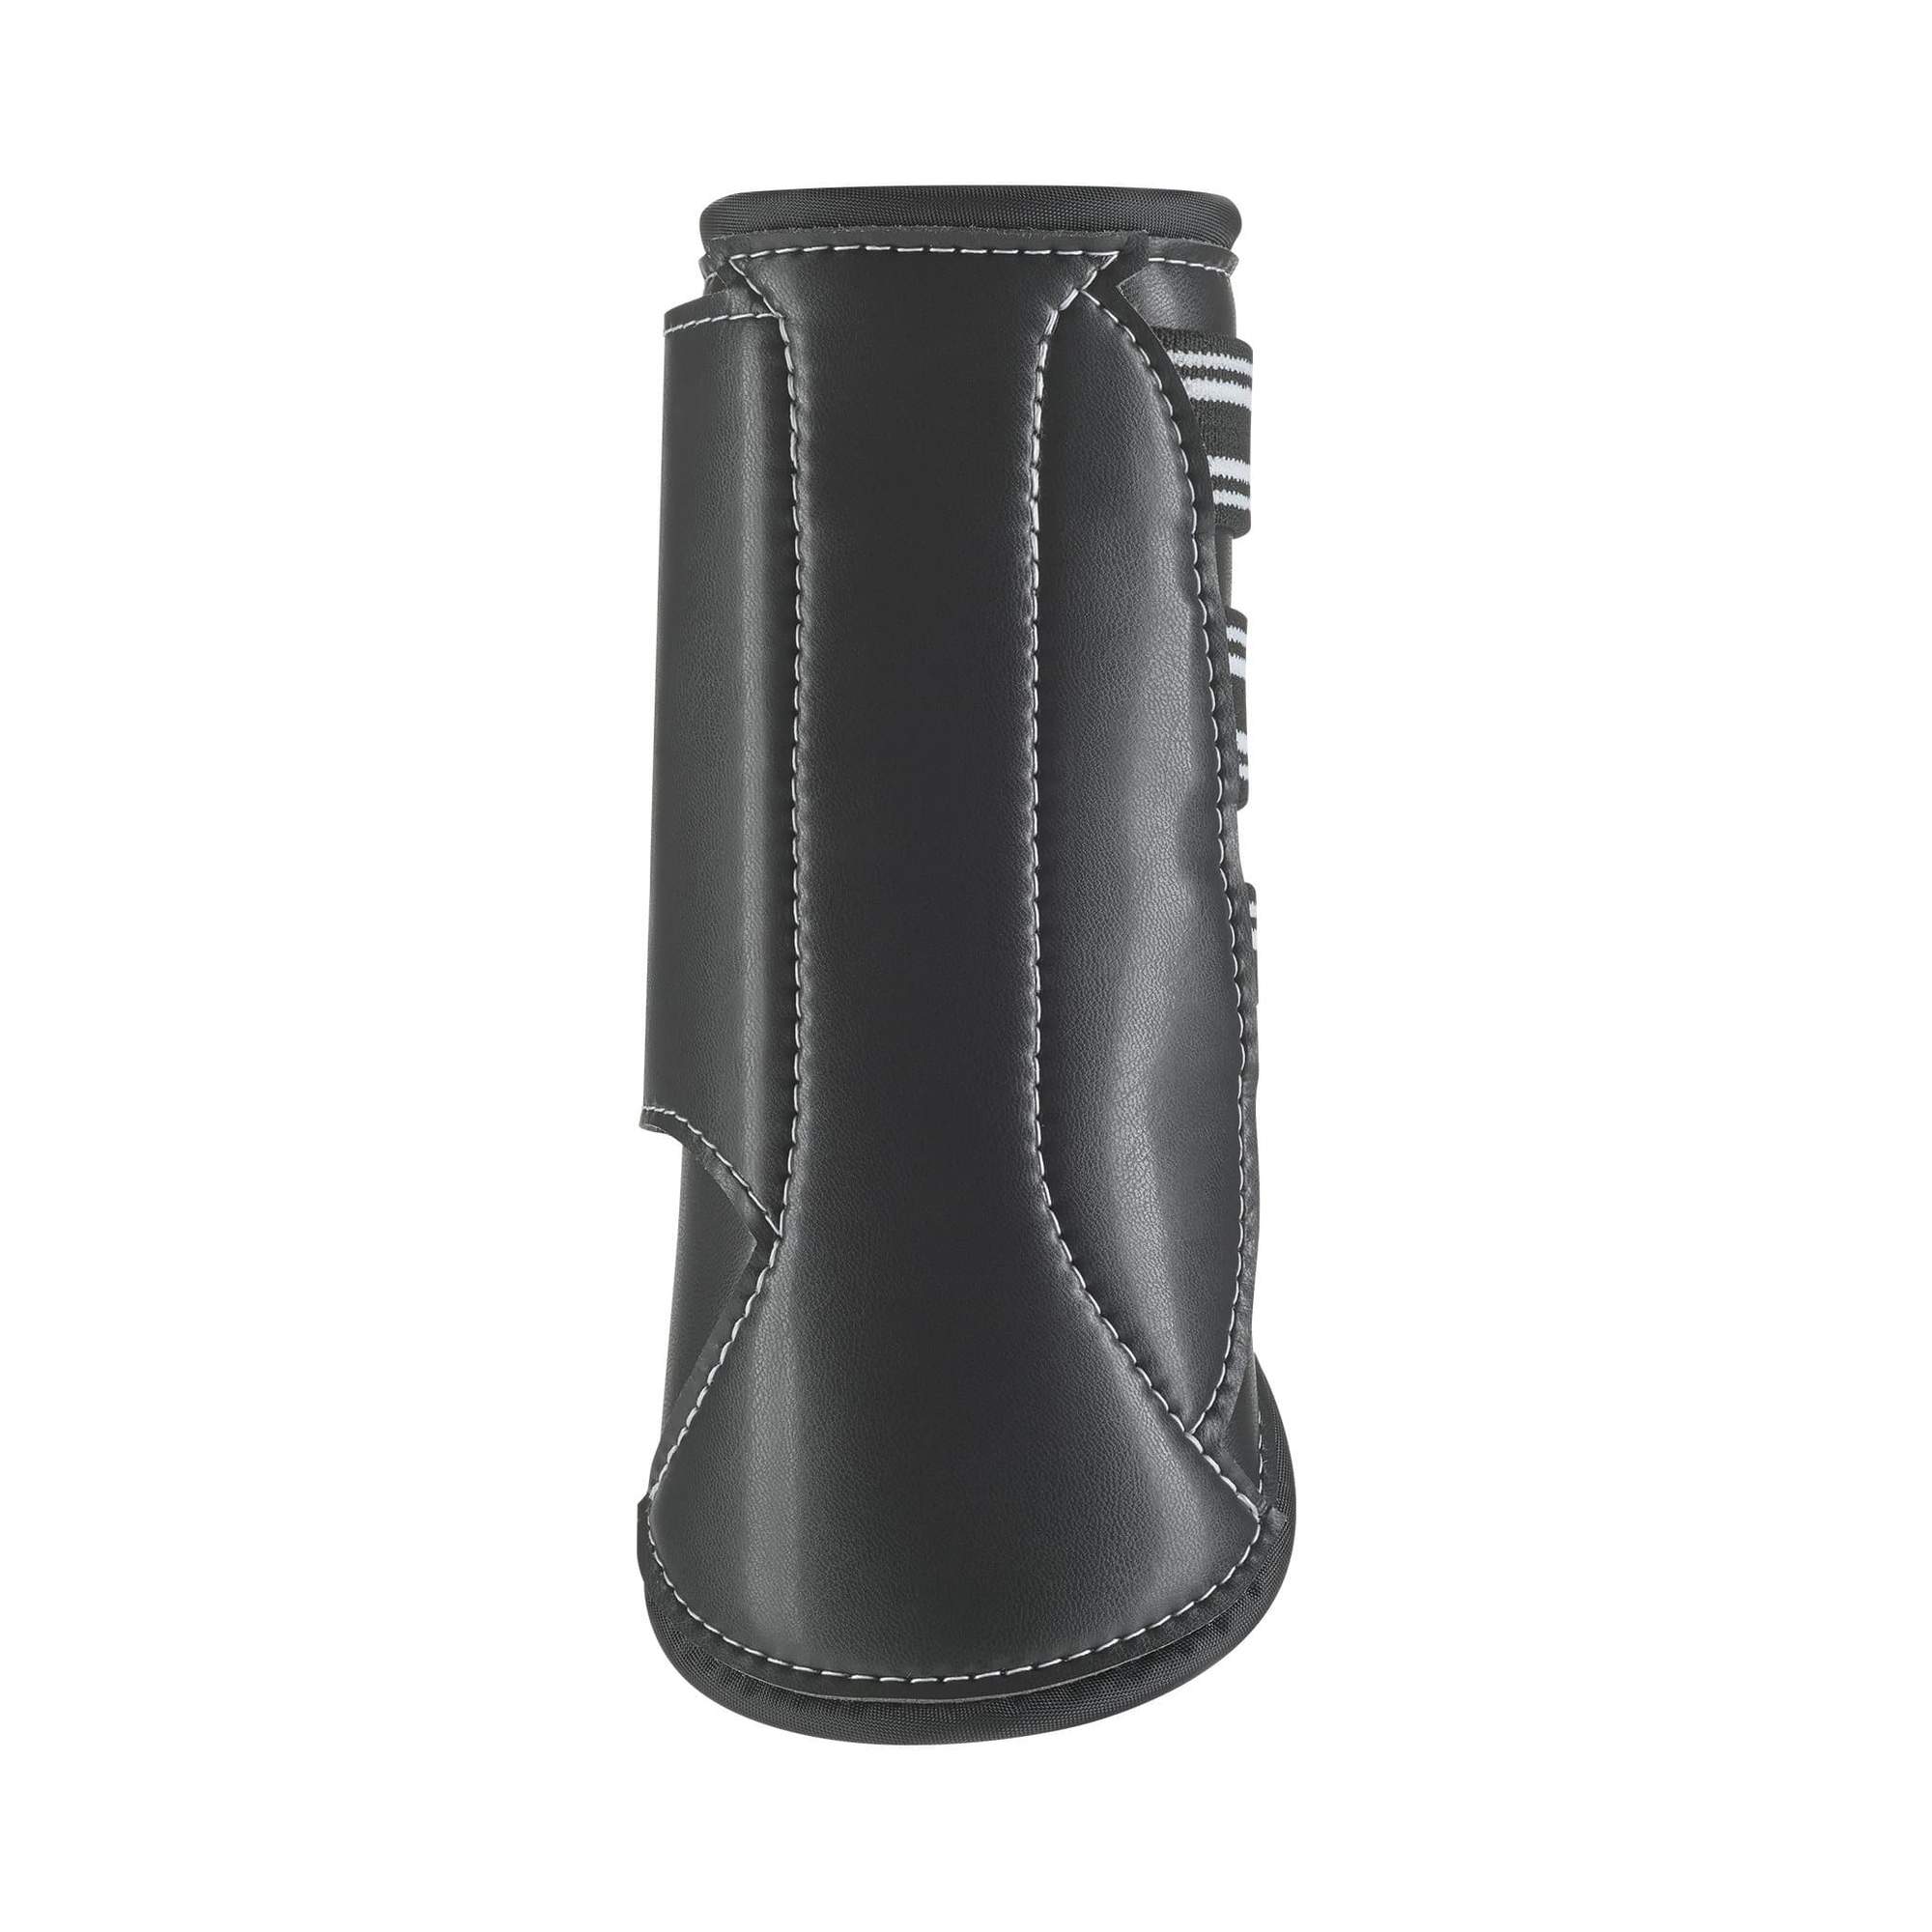 MULTITEQ™ FRONT BOOT